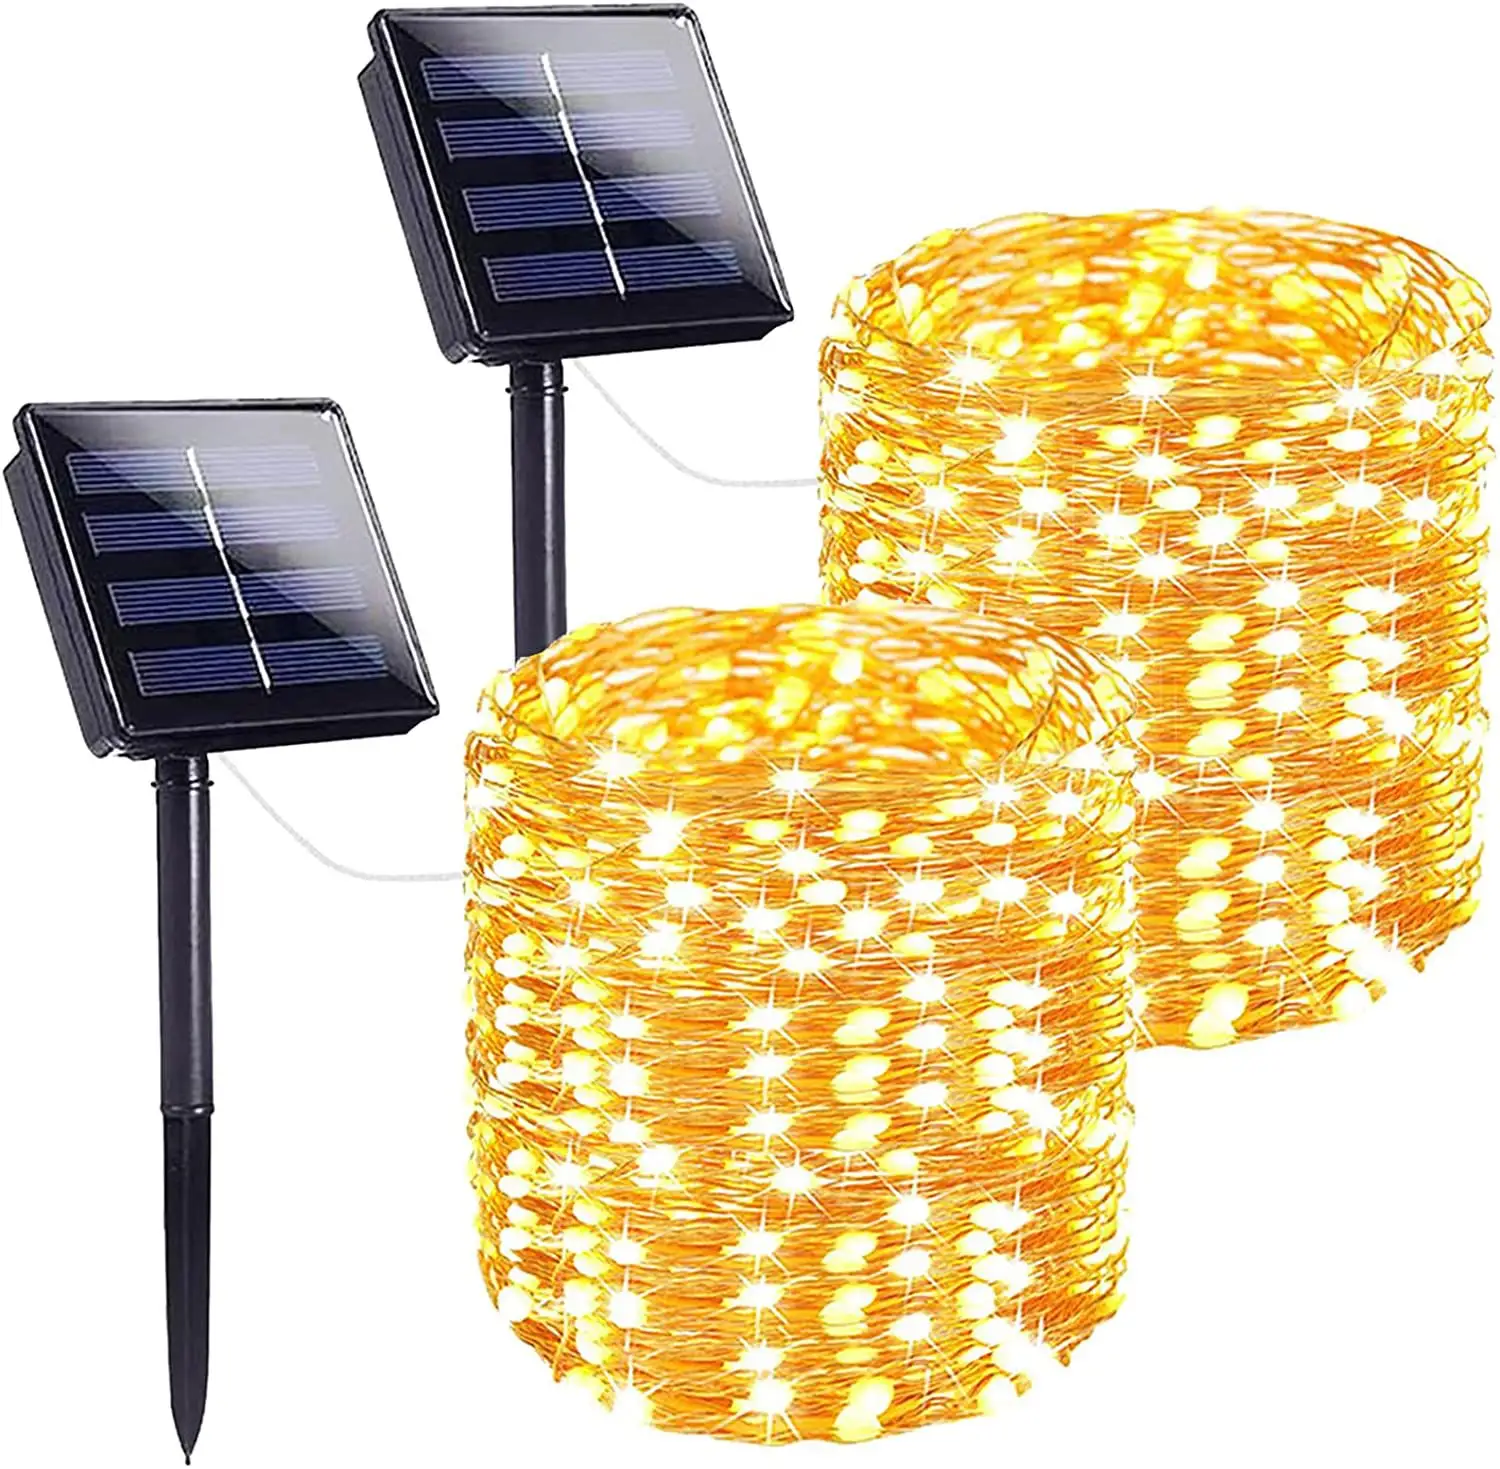 Woohaha 2 Pack 100 LED Solar String Lights Outdoor Waterproof Copper Wire 8 Modes Fairy Lights for Garden Patio Party